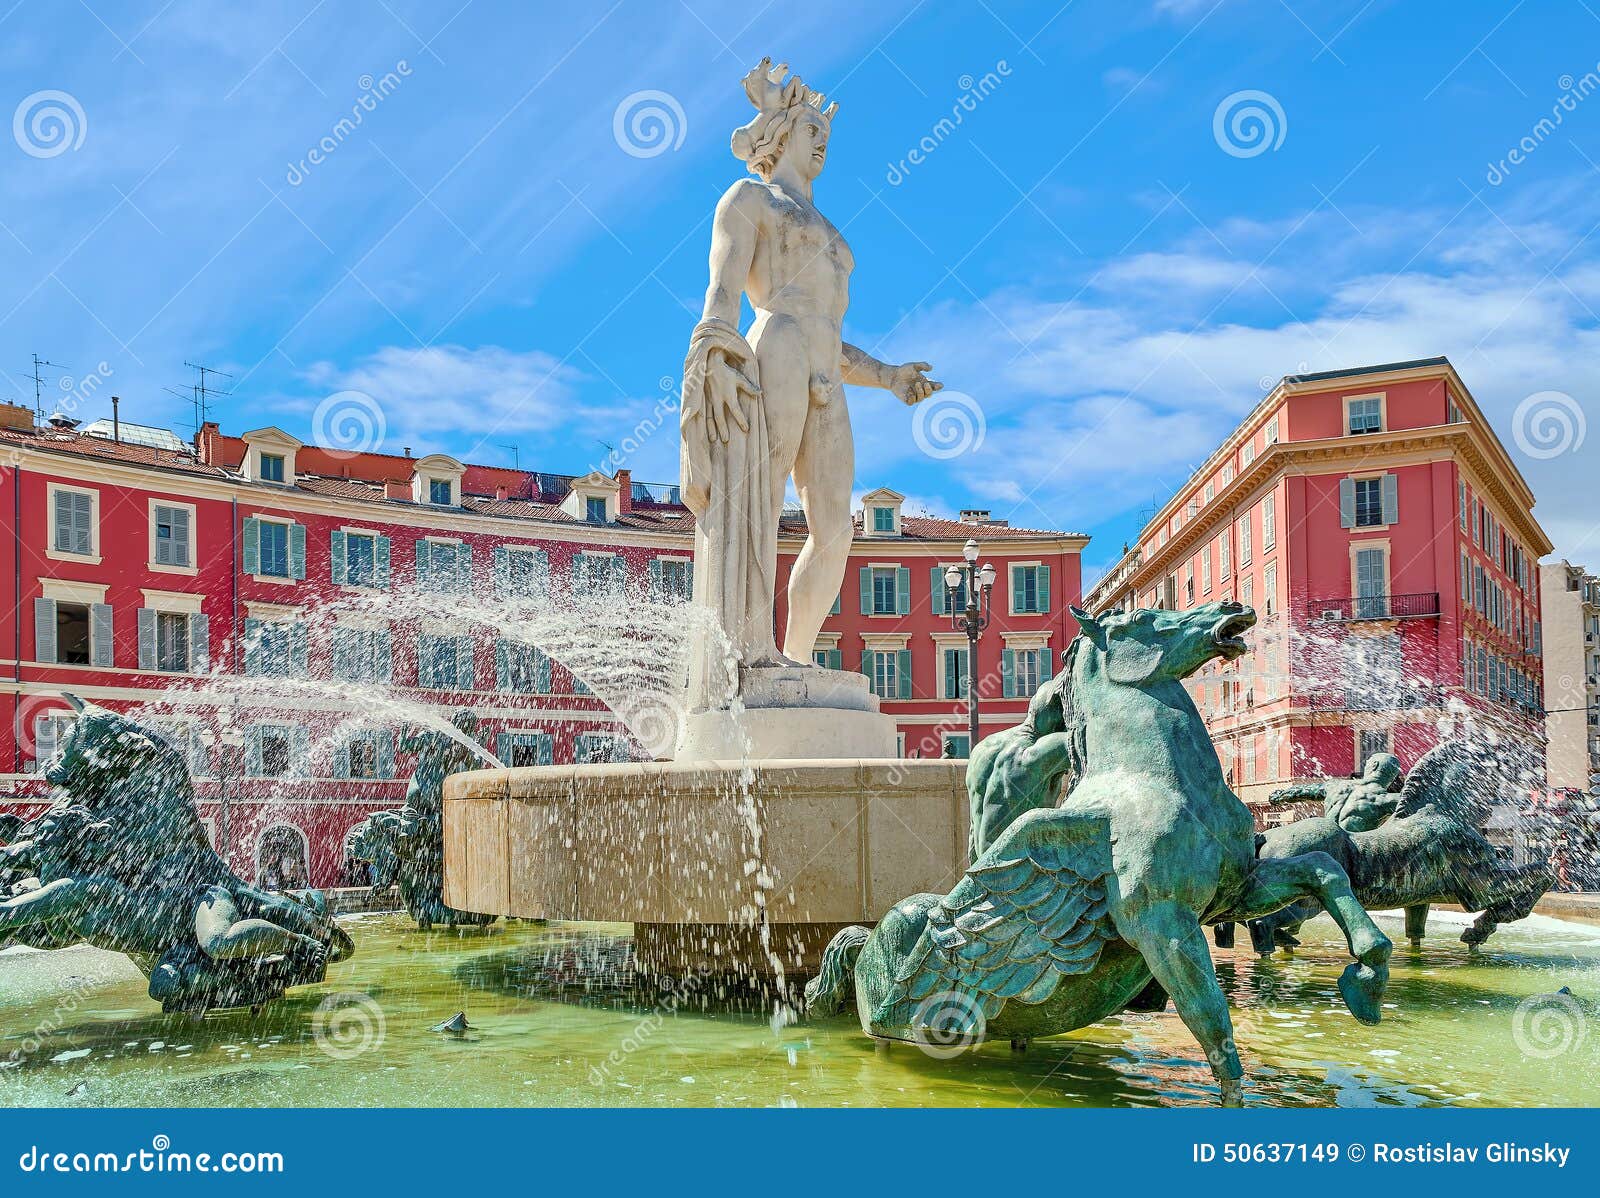 fountain of the sun in nice, france.